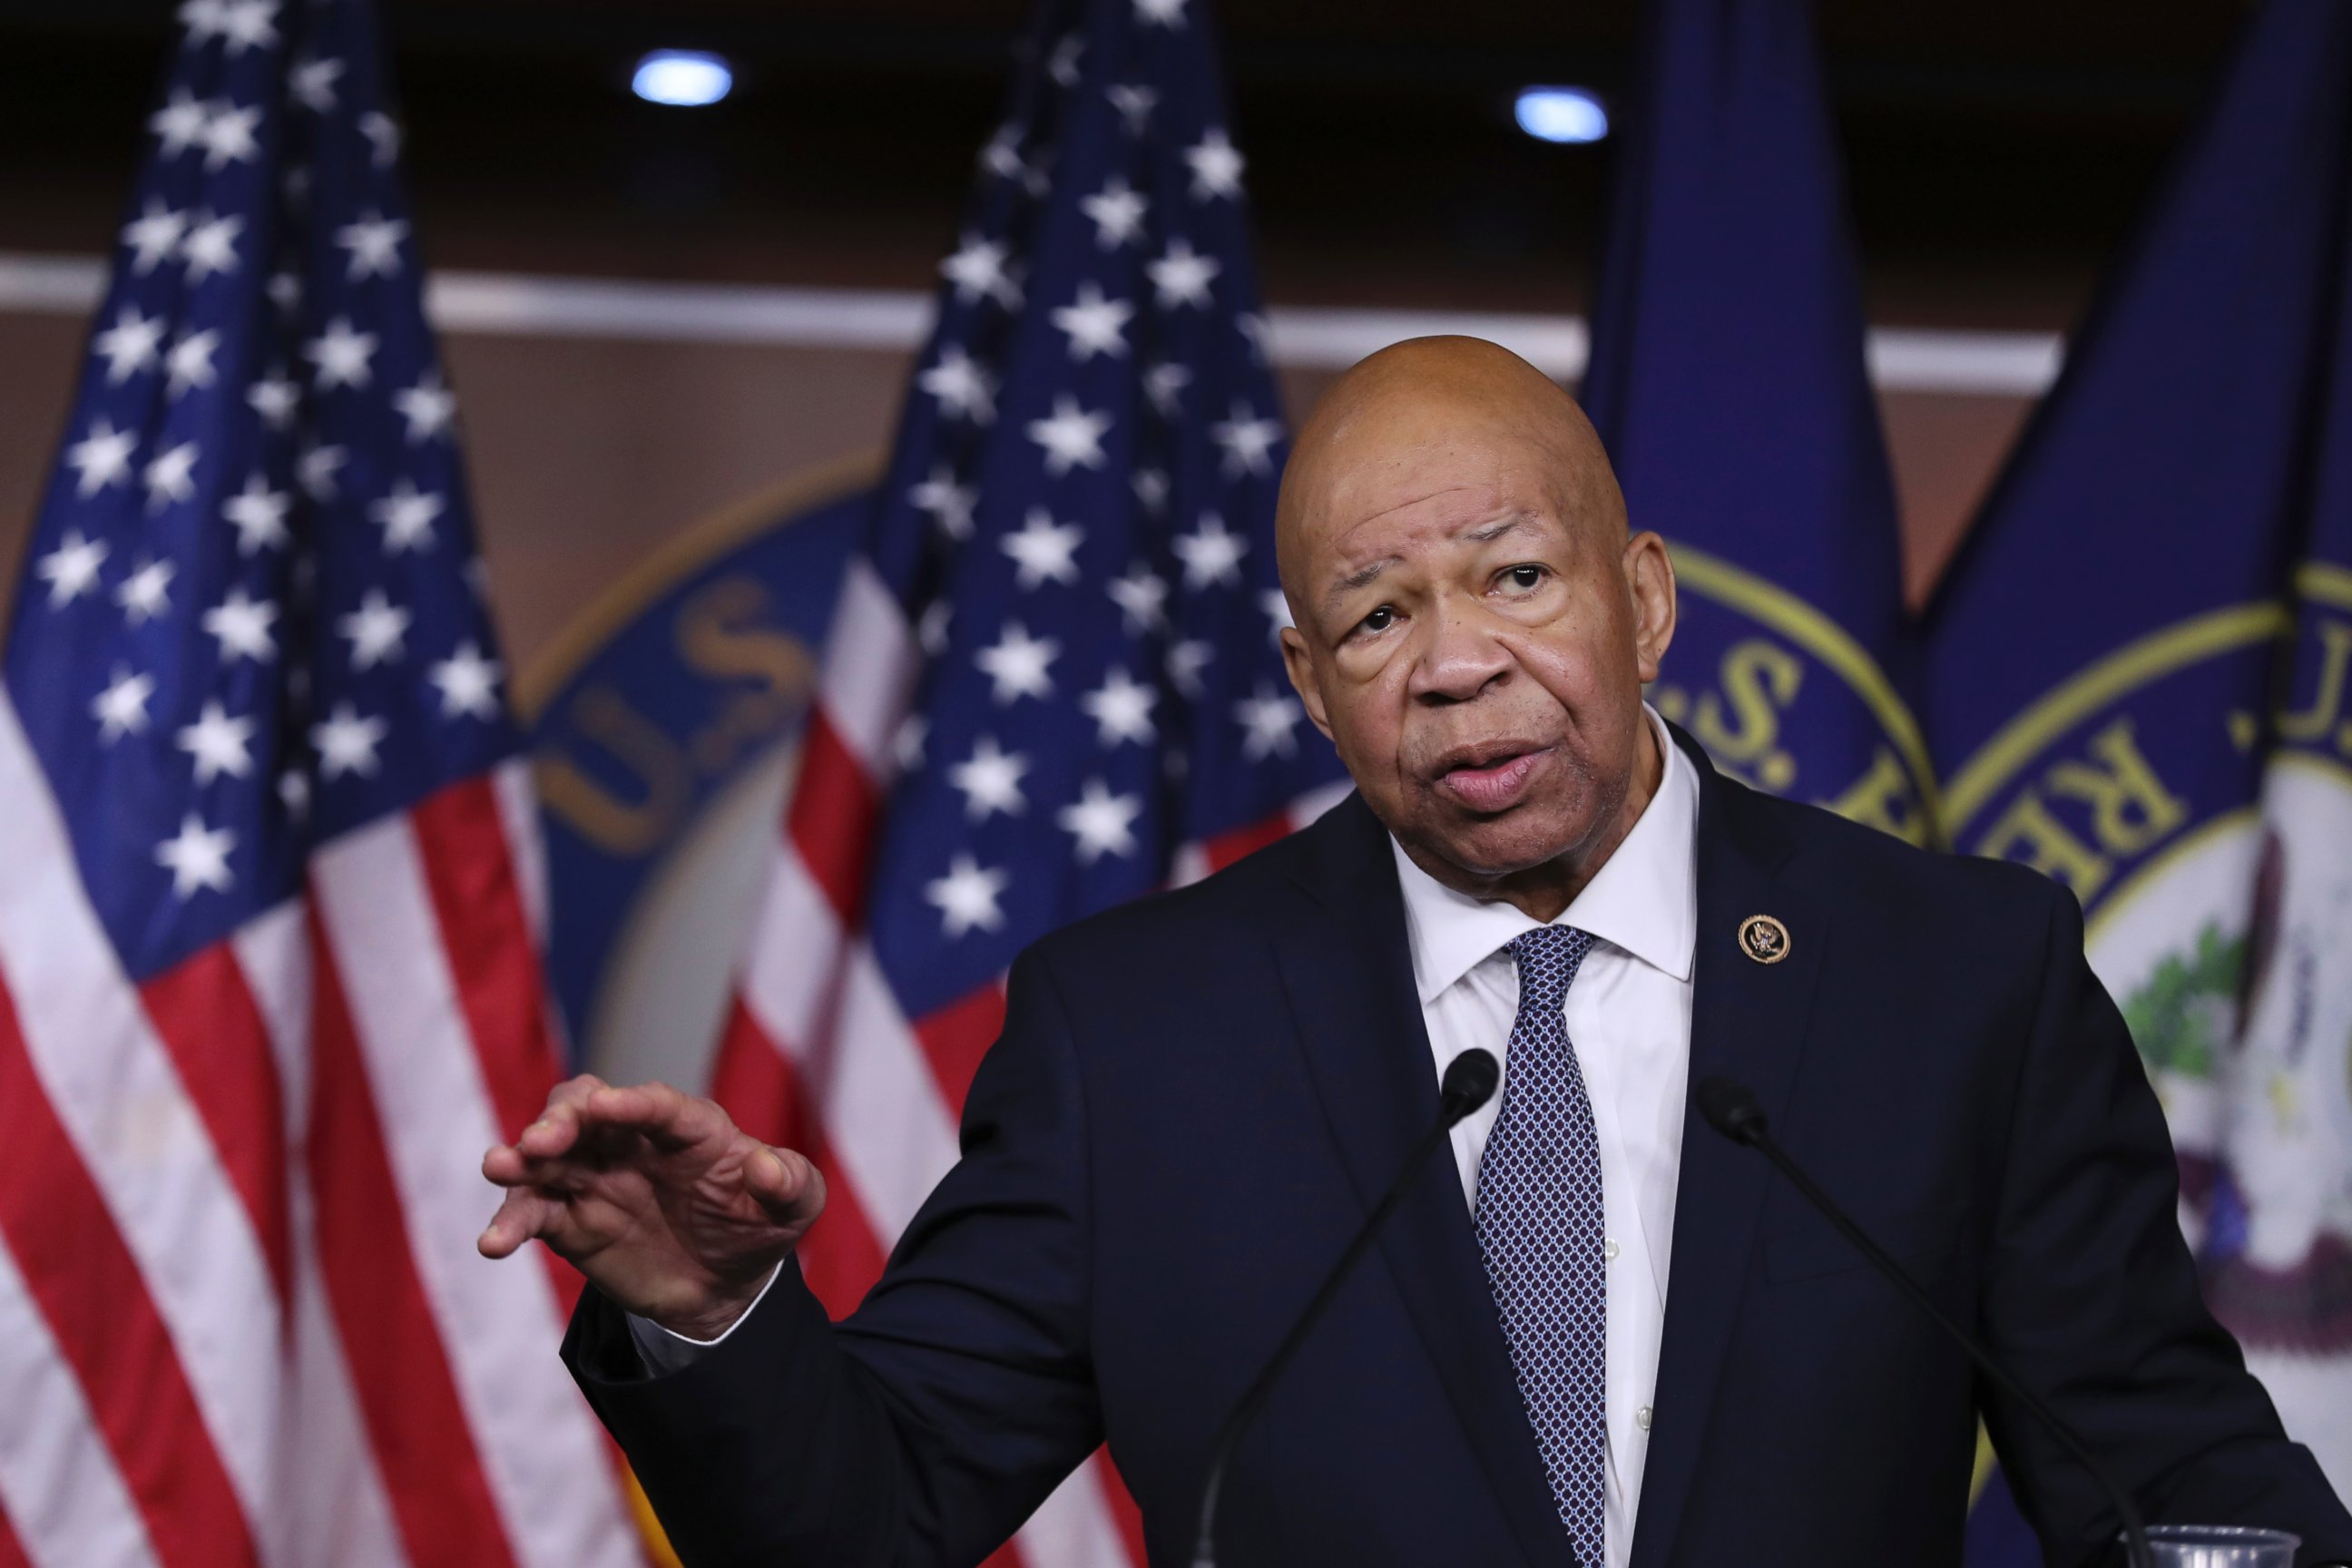 PHOTO: Rep. Elijah Cummings, D-Md. speaks during a news conference on Capitol Hill in Washington, Jan. 12, 2017.